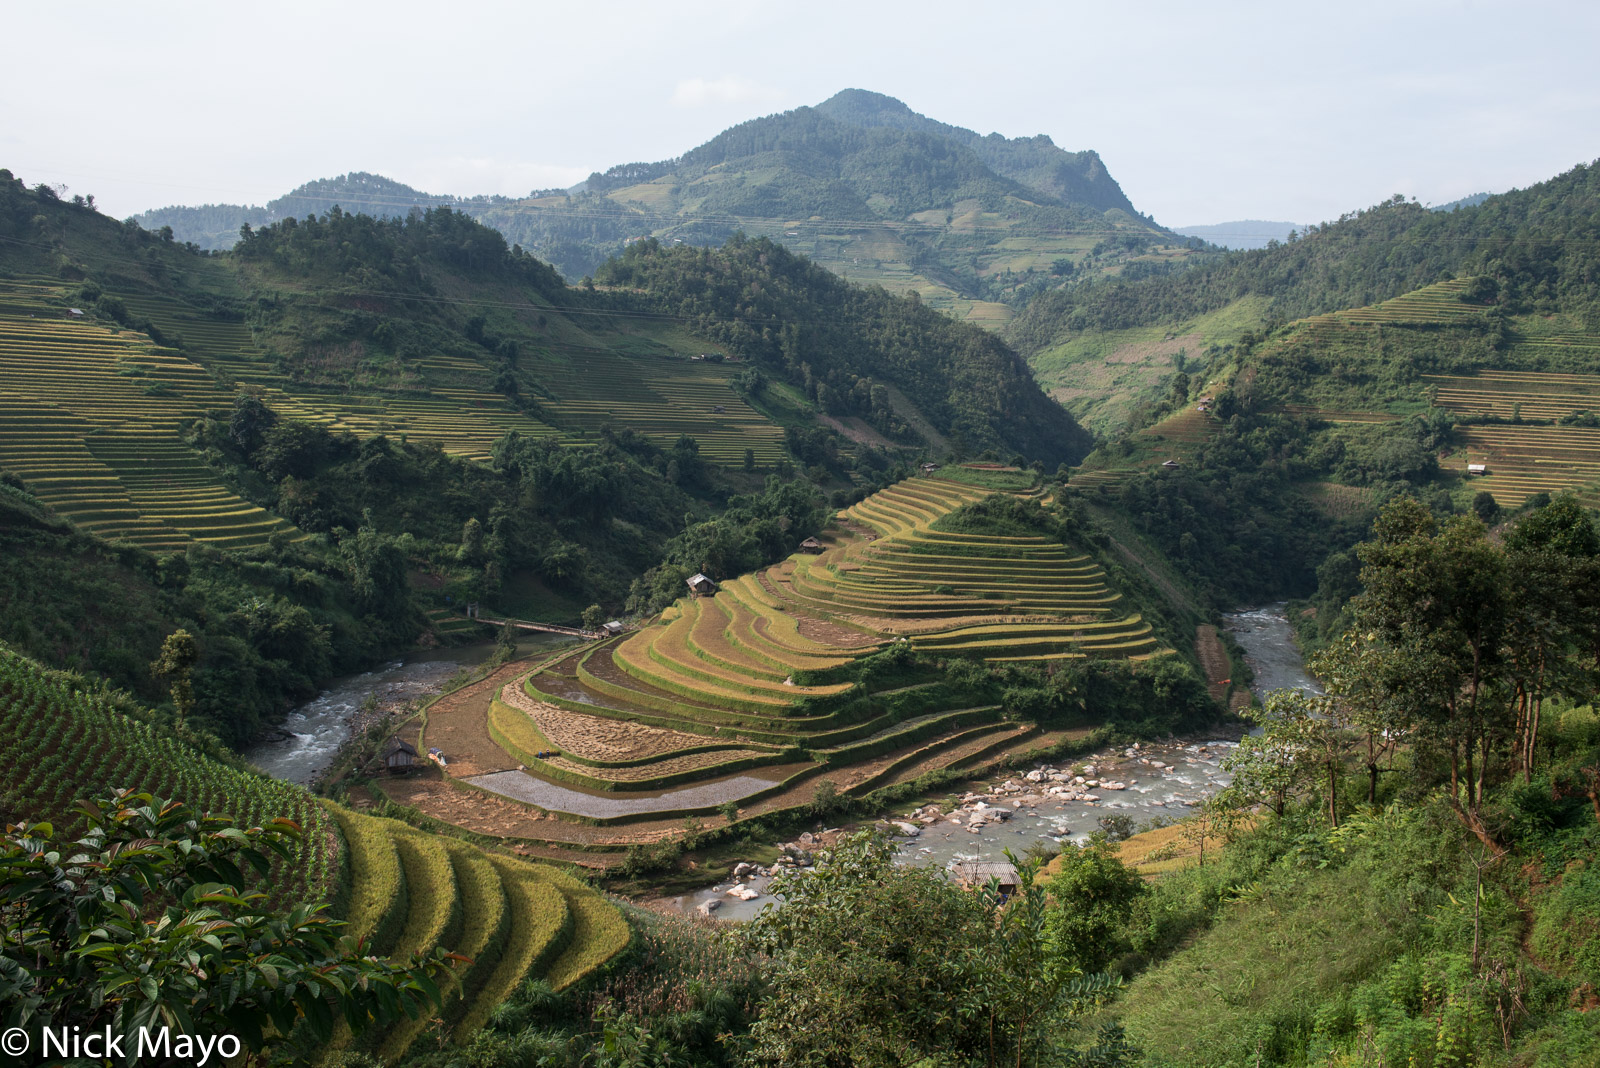 Paddy rice terraces reached by suspension bridge in the Mu Cang Chai valley.